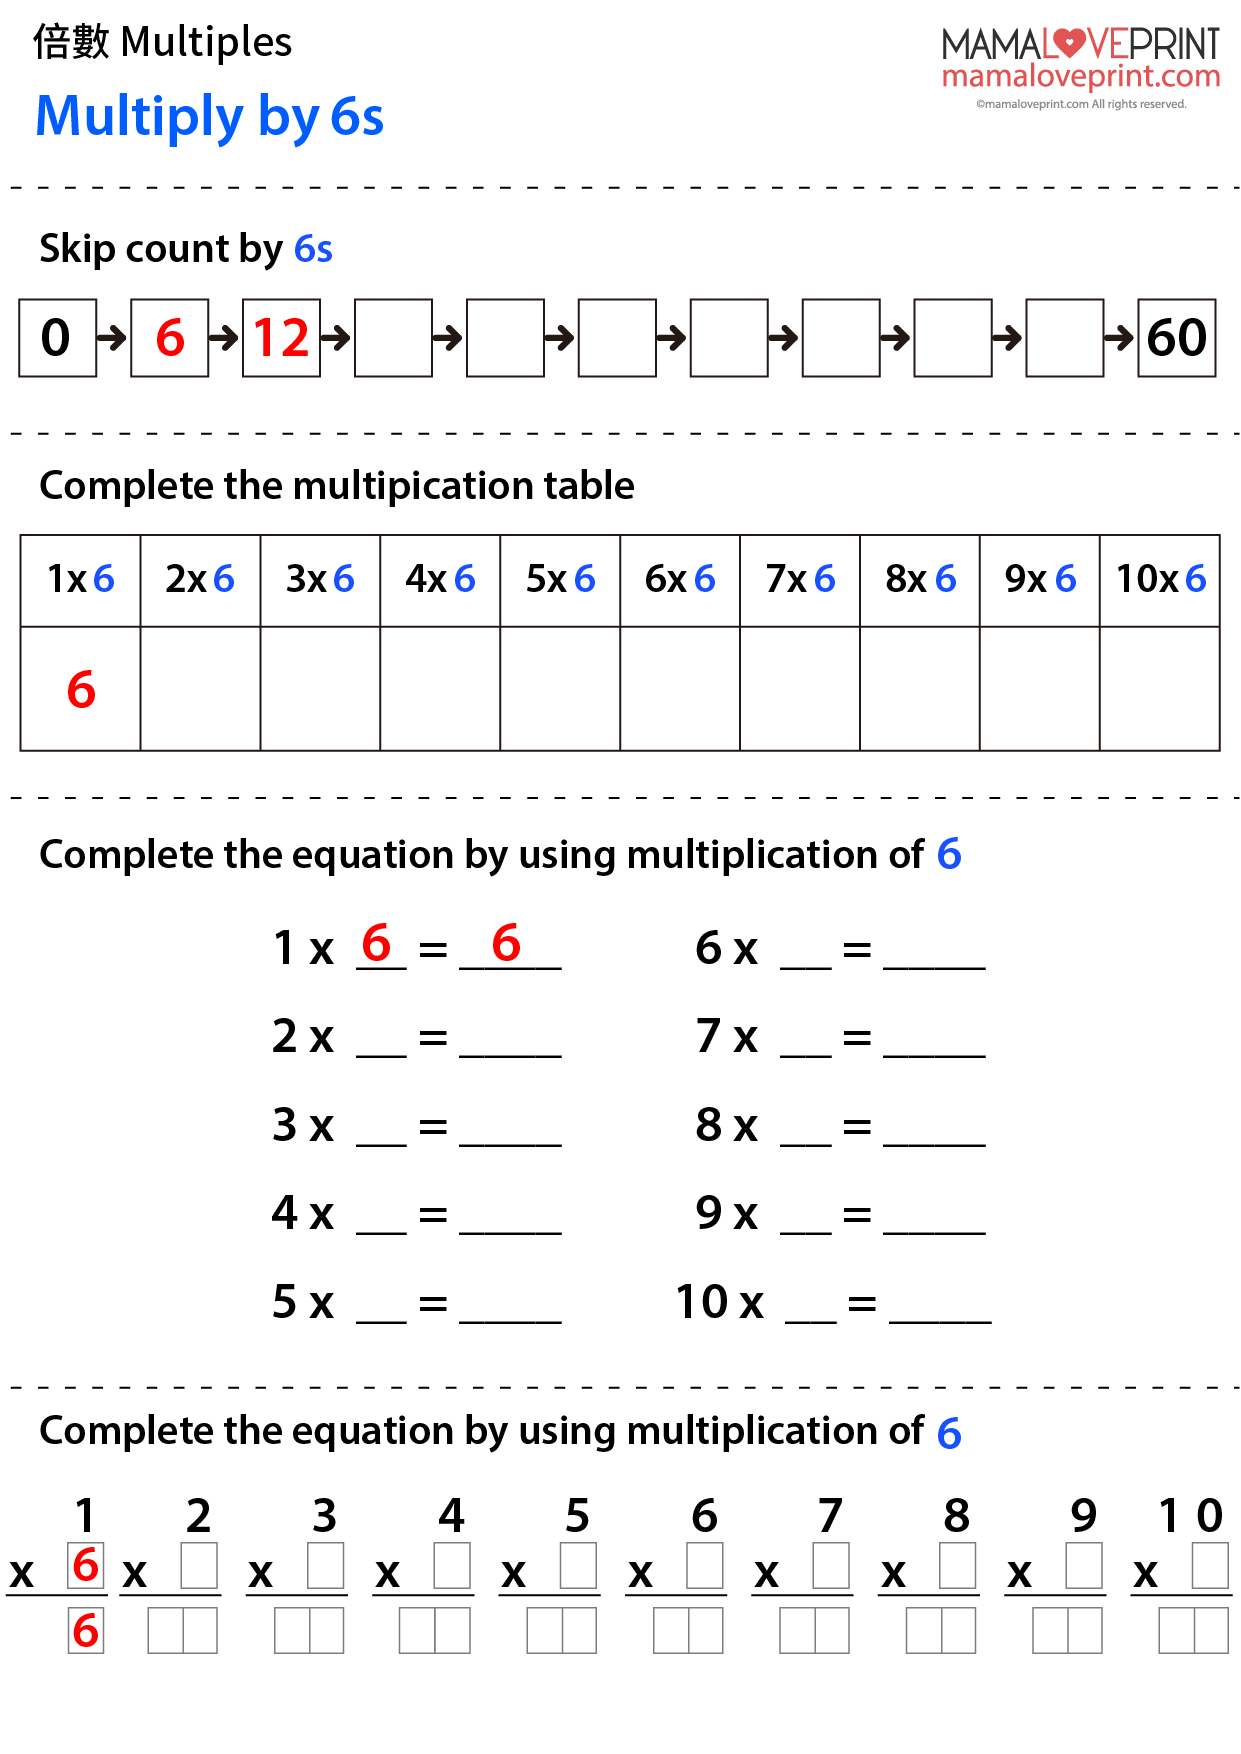 Mamaloveprint 自製工作紙- 數學倍數乘數表(1-10) Multiplication And Time Tables Exercises  Math Worksheets Printable Freebies Kindergarten Activities Daily Math  Practices